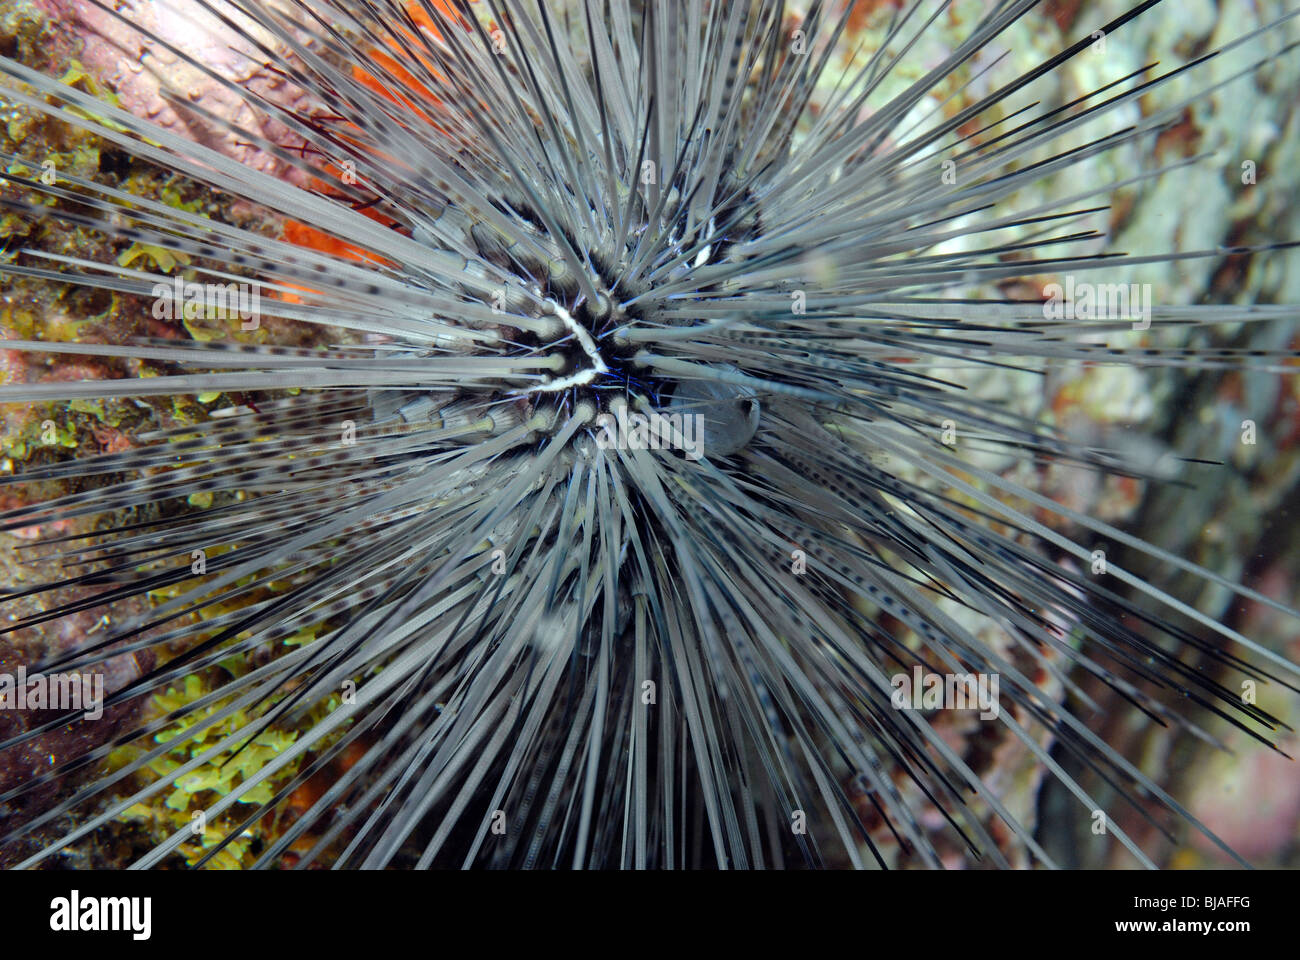 Long spined urchin in the Gulf of Mexico. Stock Photo